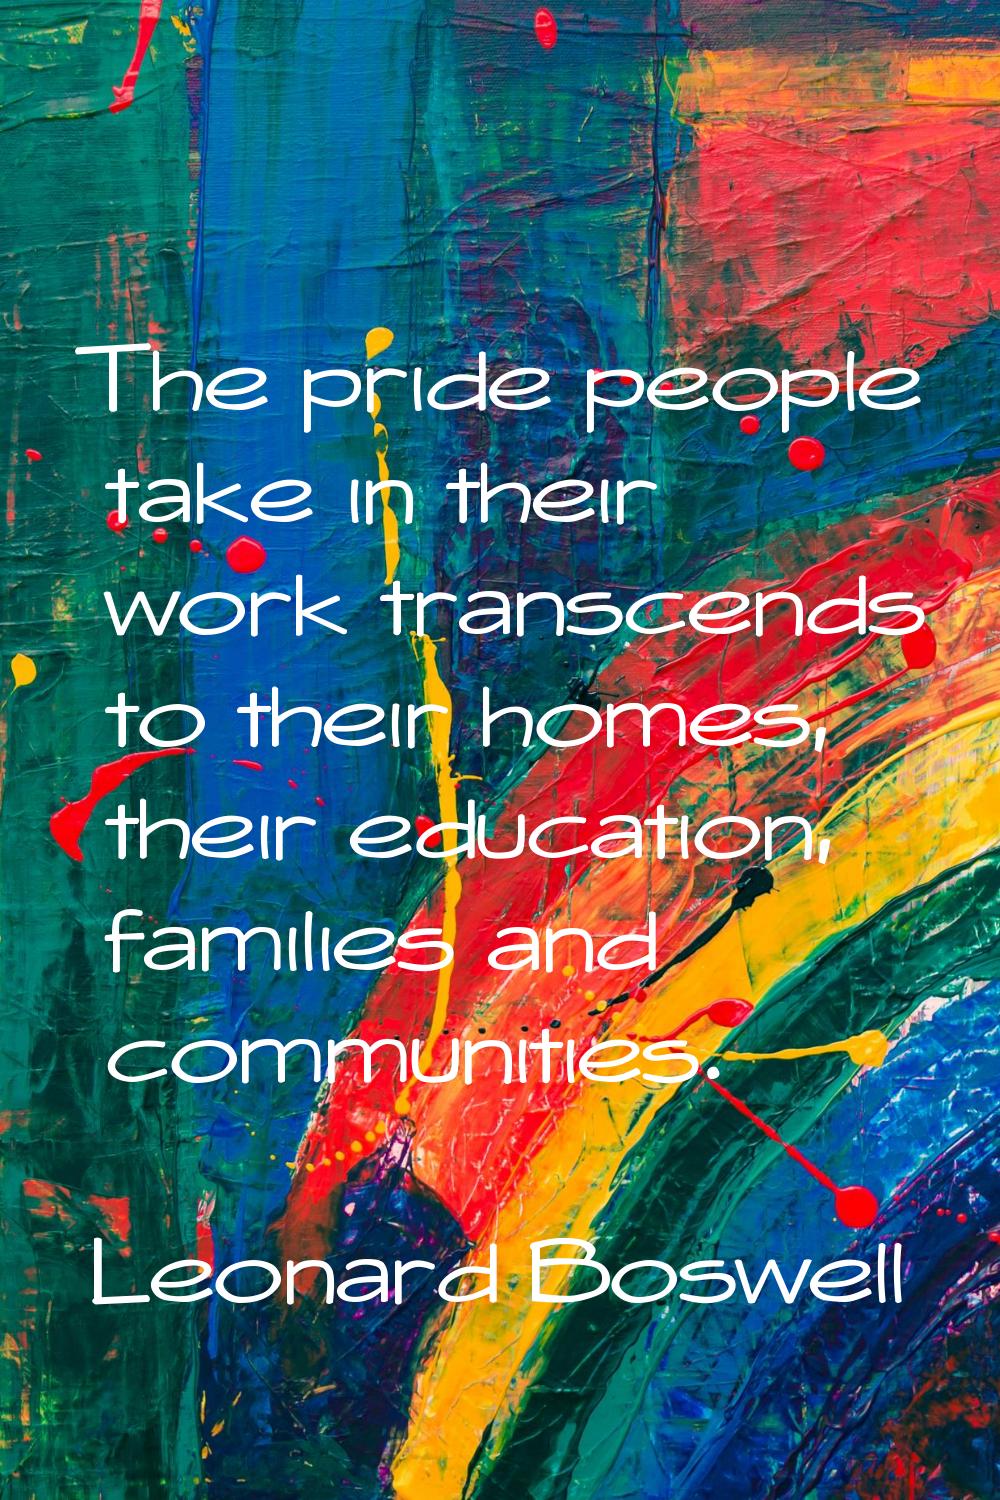 The pride people take in their work transcends to their homes, their education, families and commun